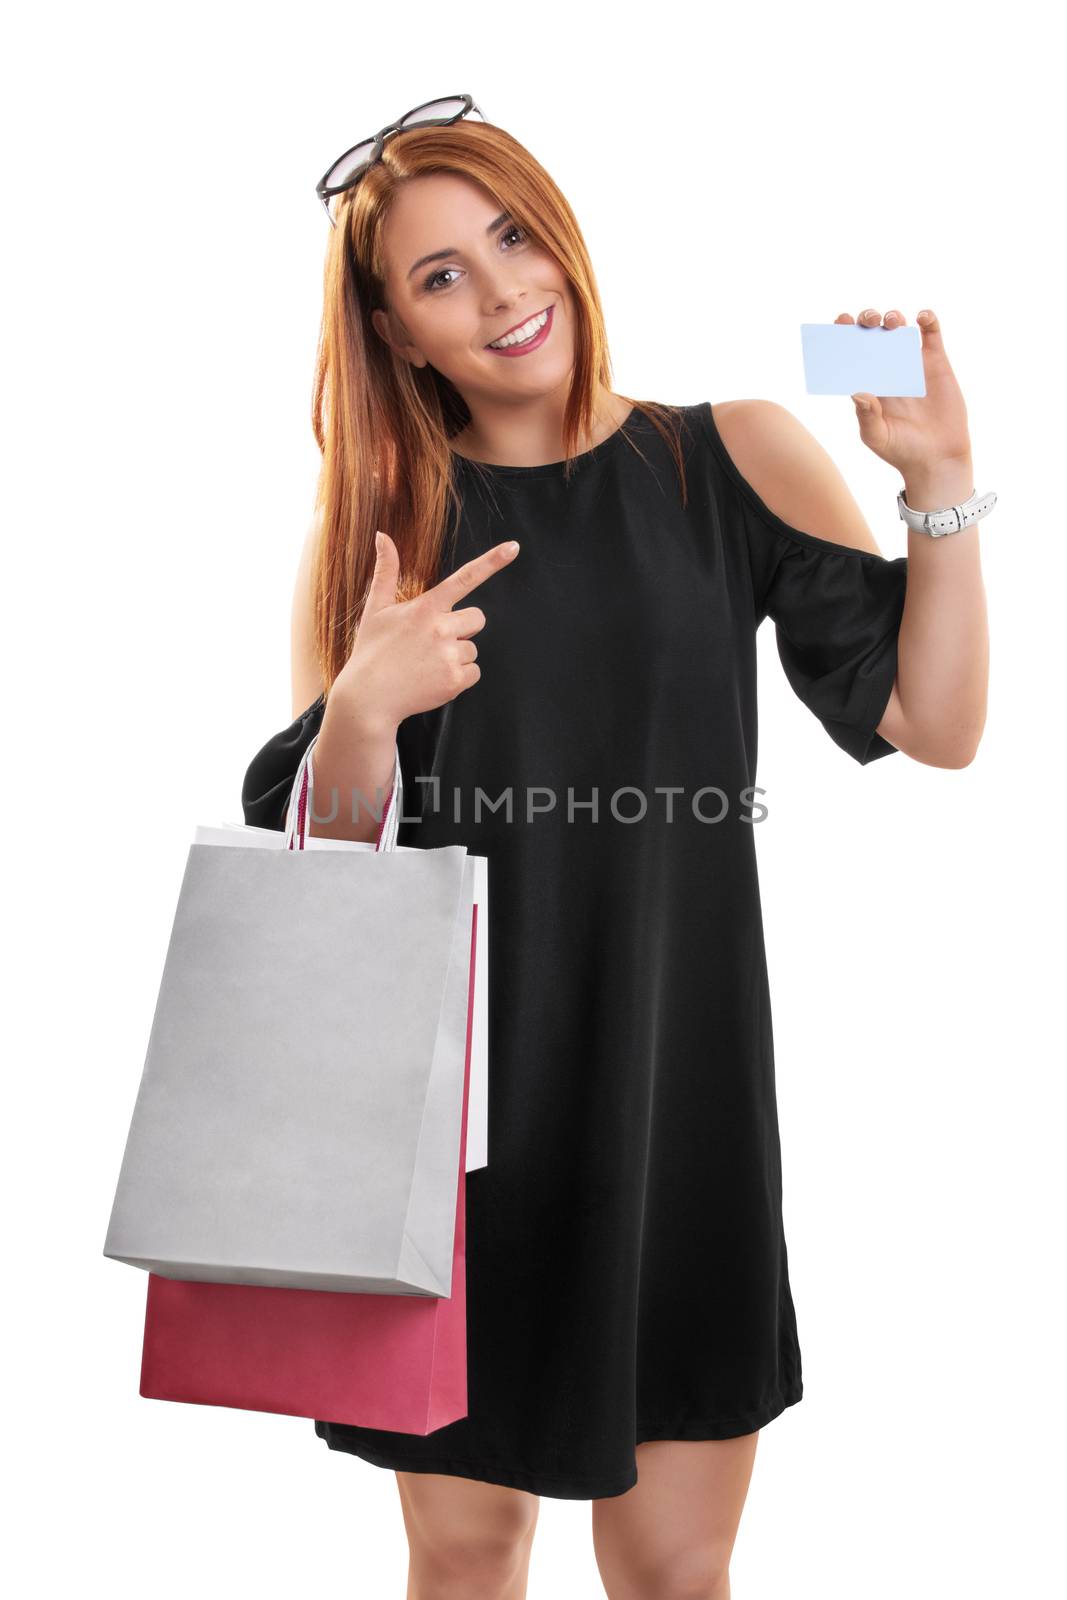 Young girl holding shopping bags and a card by Mendelex